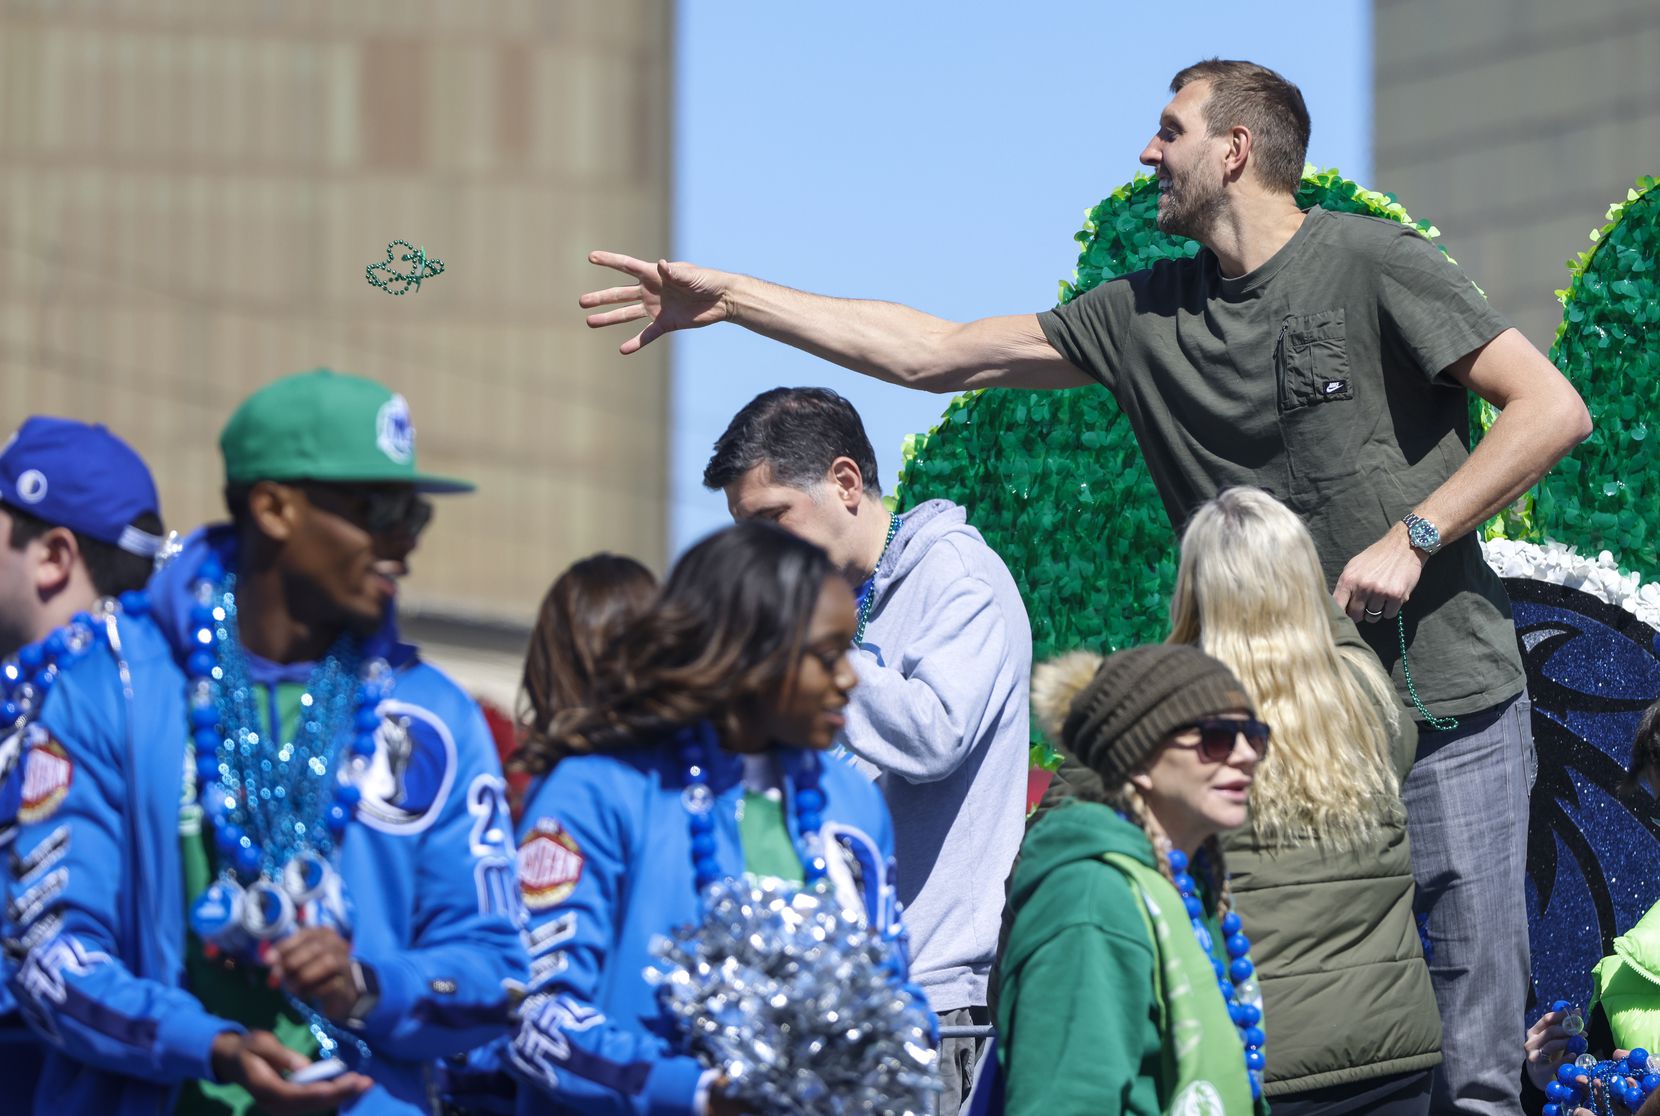 Dirk Nowitzki, the parade's grand marshal, tosses beads to people lined up along the route.